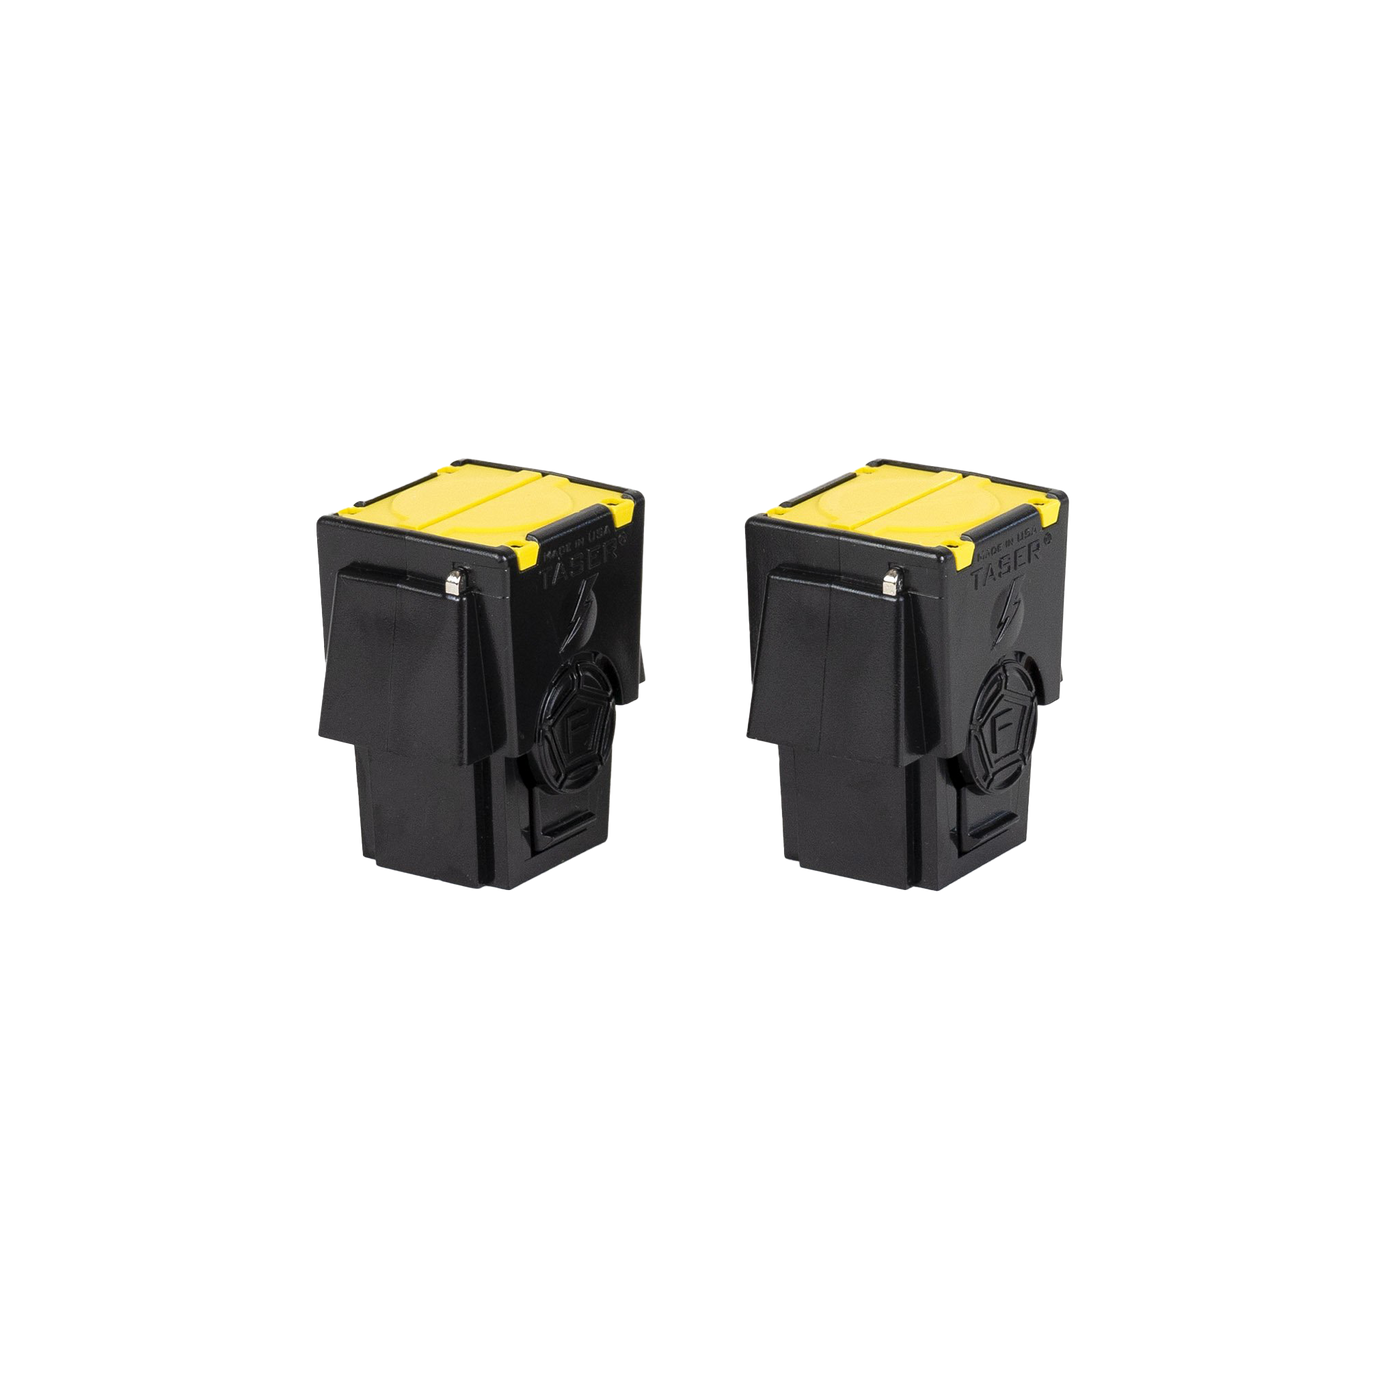 Two-Pack of Live Cartridges for TASER X1/X26P/X26C/M26C